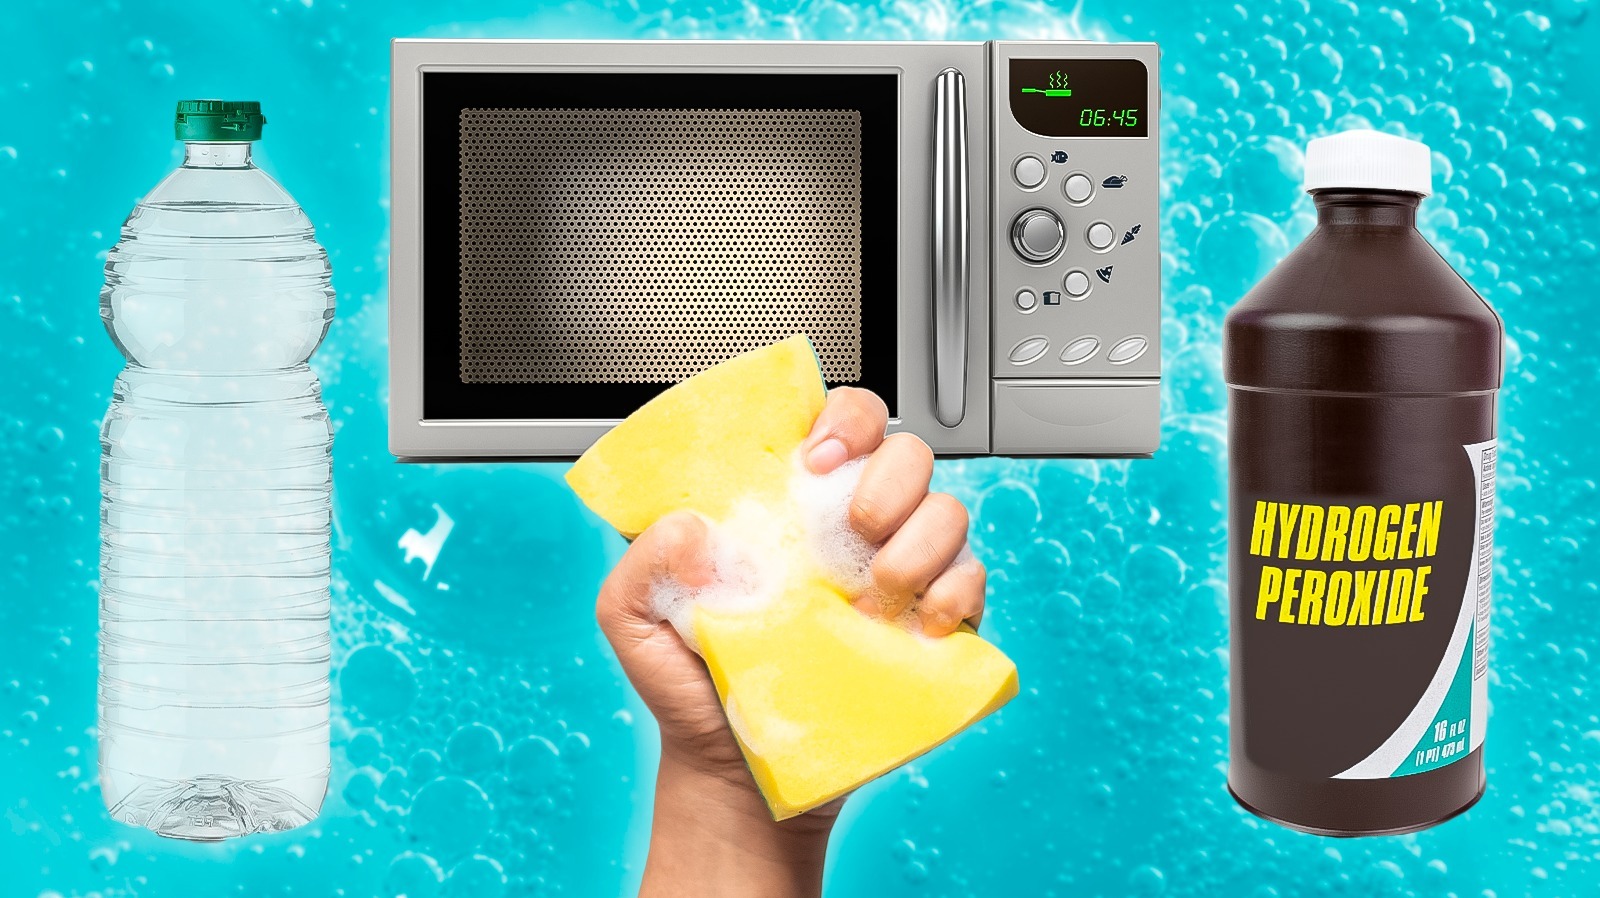 https://www.tastingtable.com/img/gallery/9-best-ways-to-clean-and-sanitize-your-sponge/l-intro-1703081892.jpg